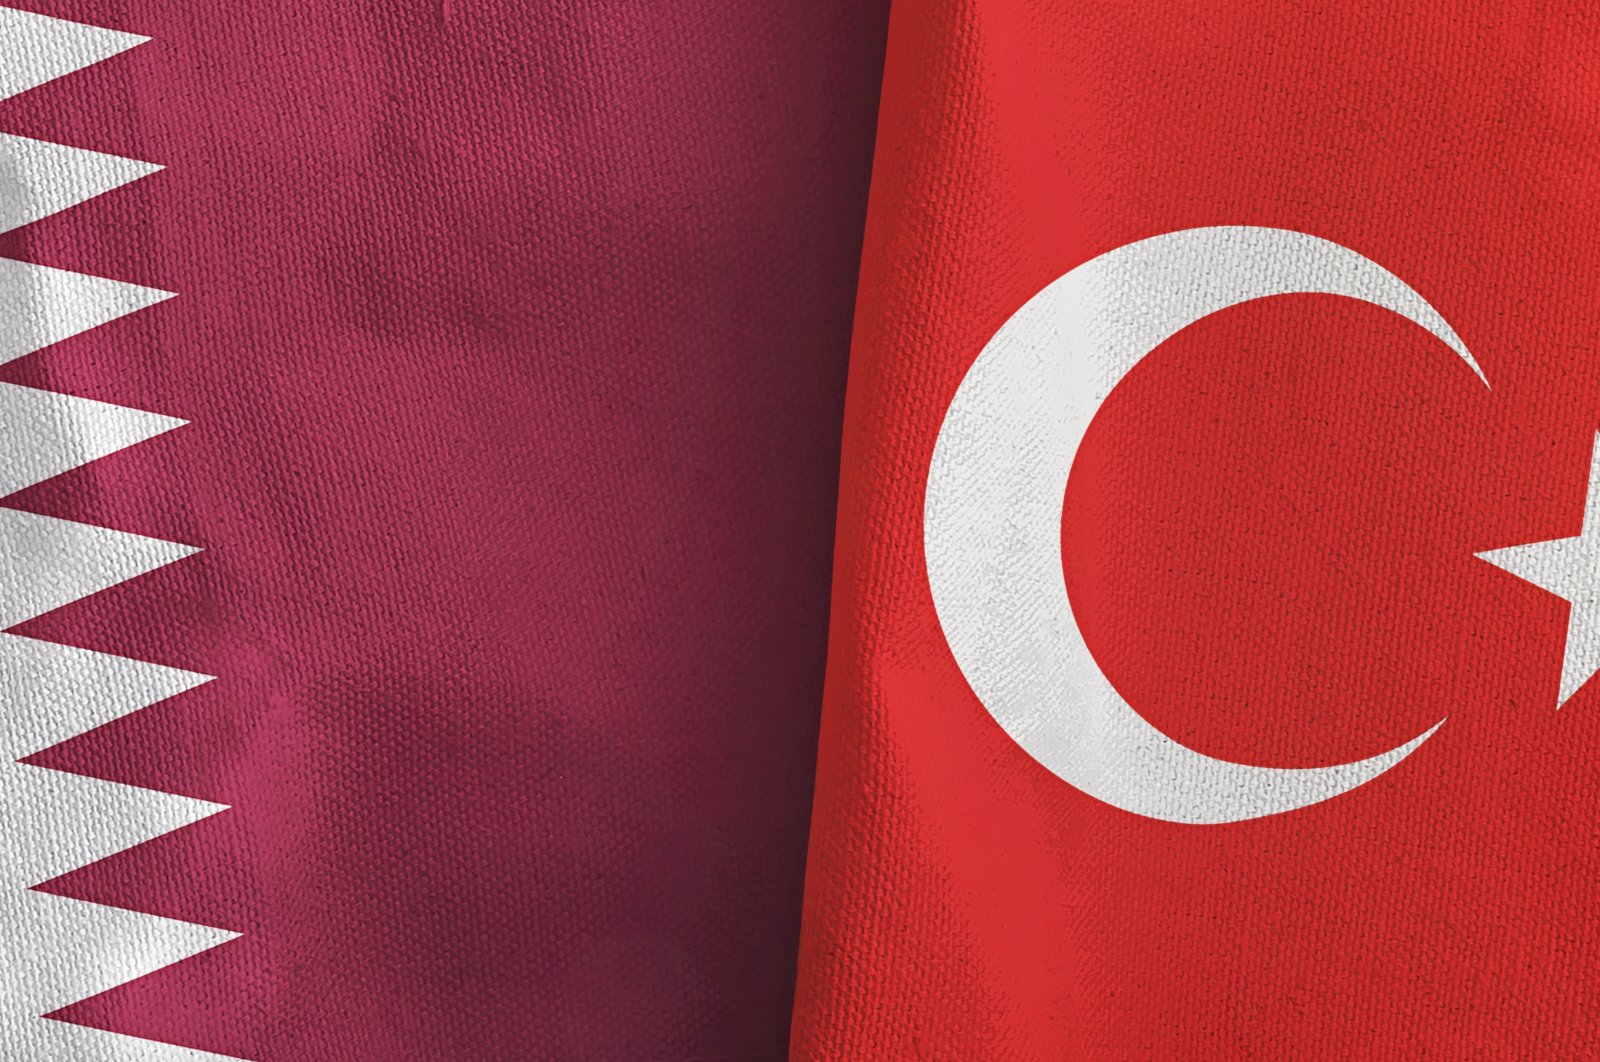 The flags of Turkey and Qatar folded together. (Shutterstock)